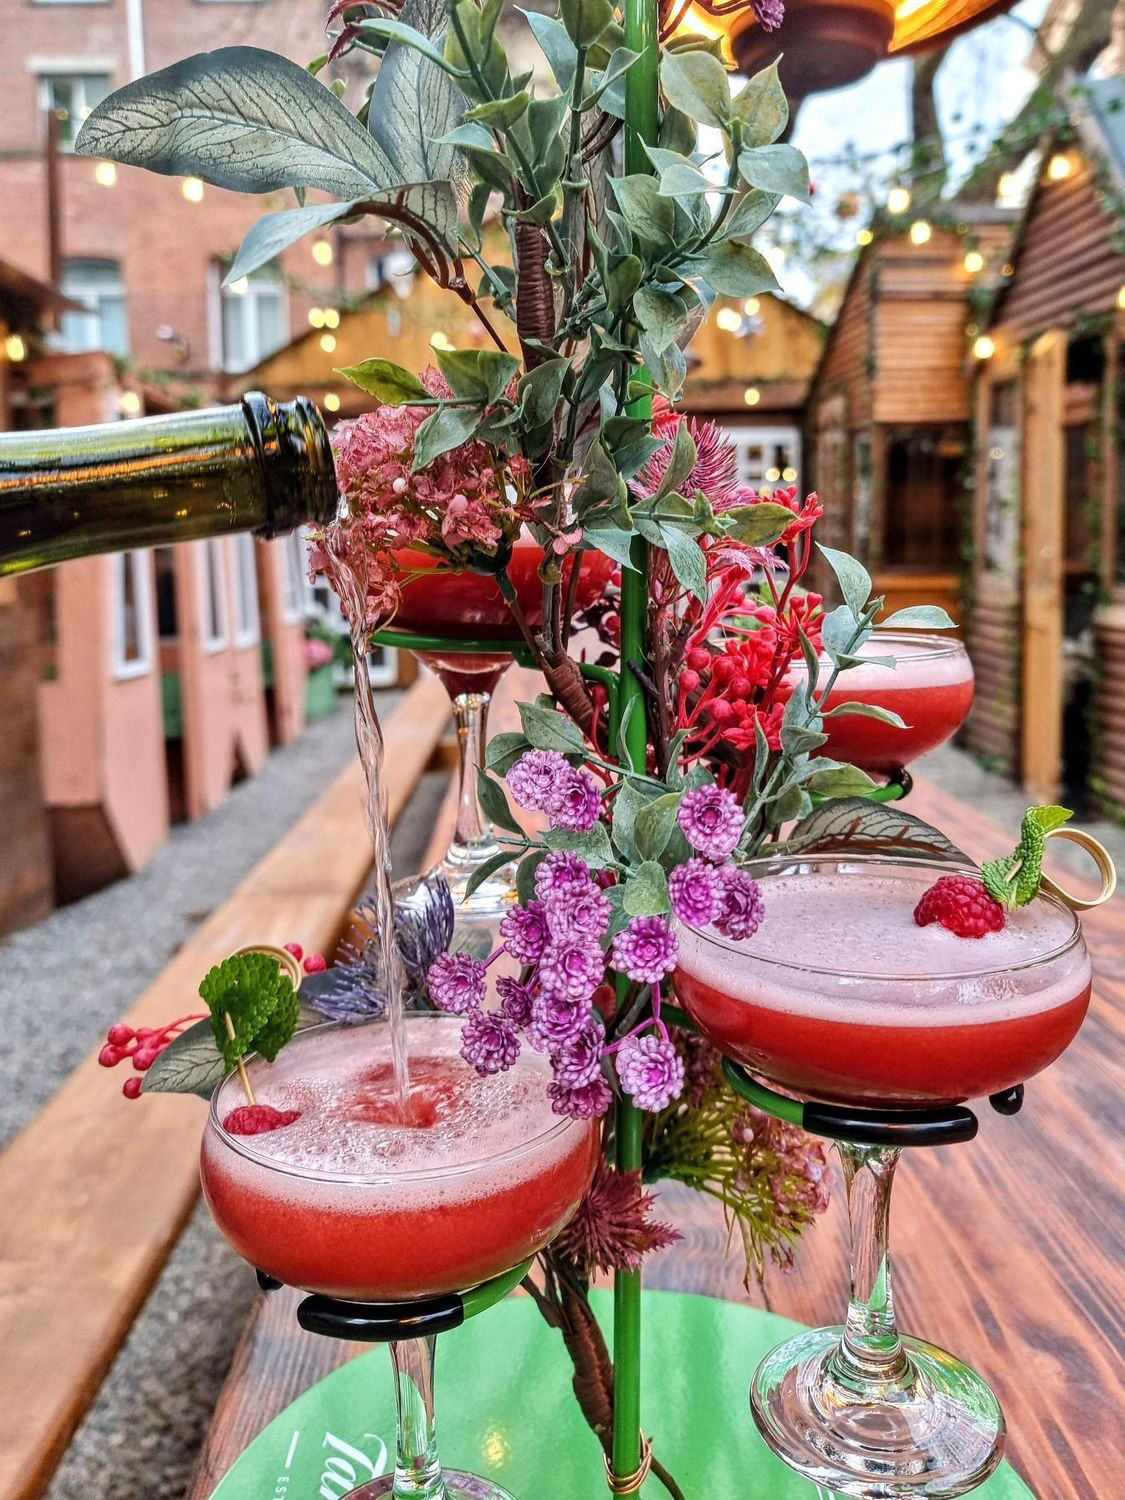 You can get mulled wine Christmas cocktail trees at this Manchester winter village, The Manc